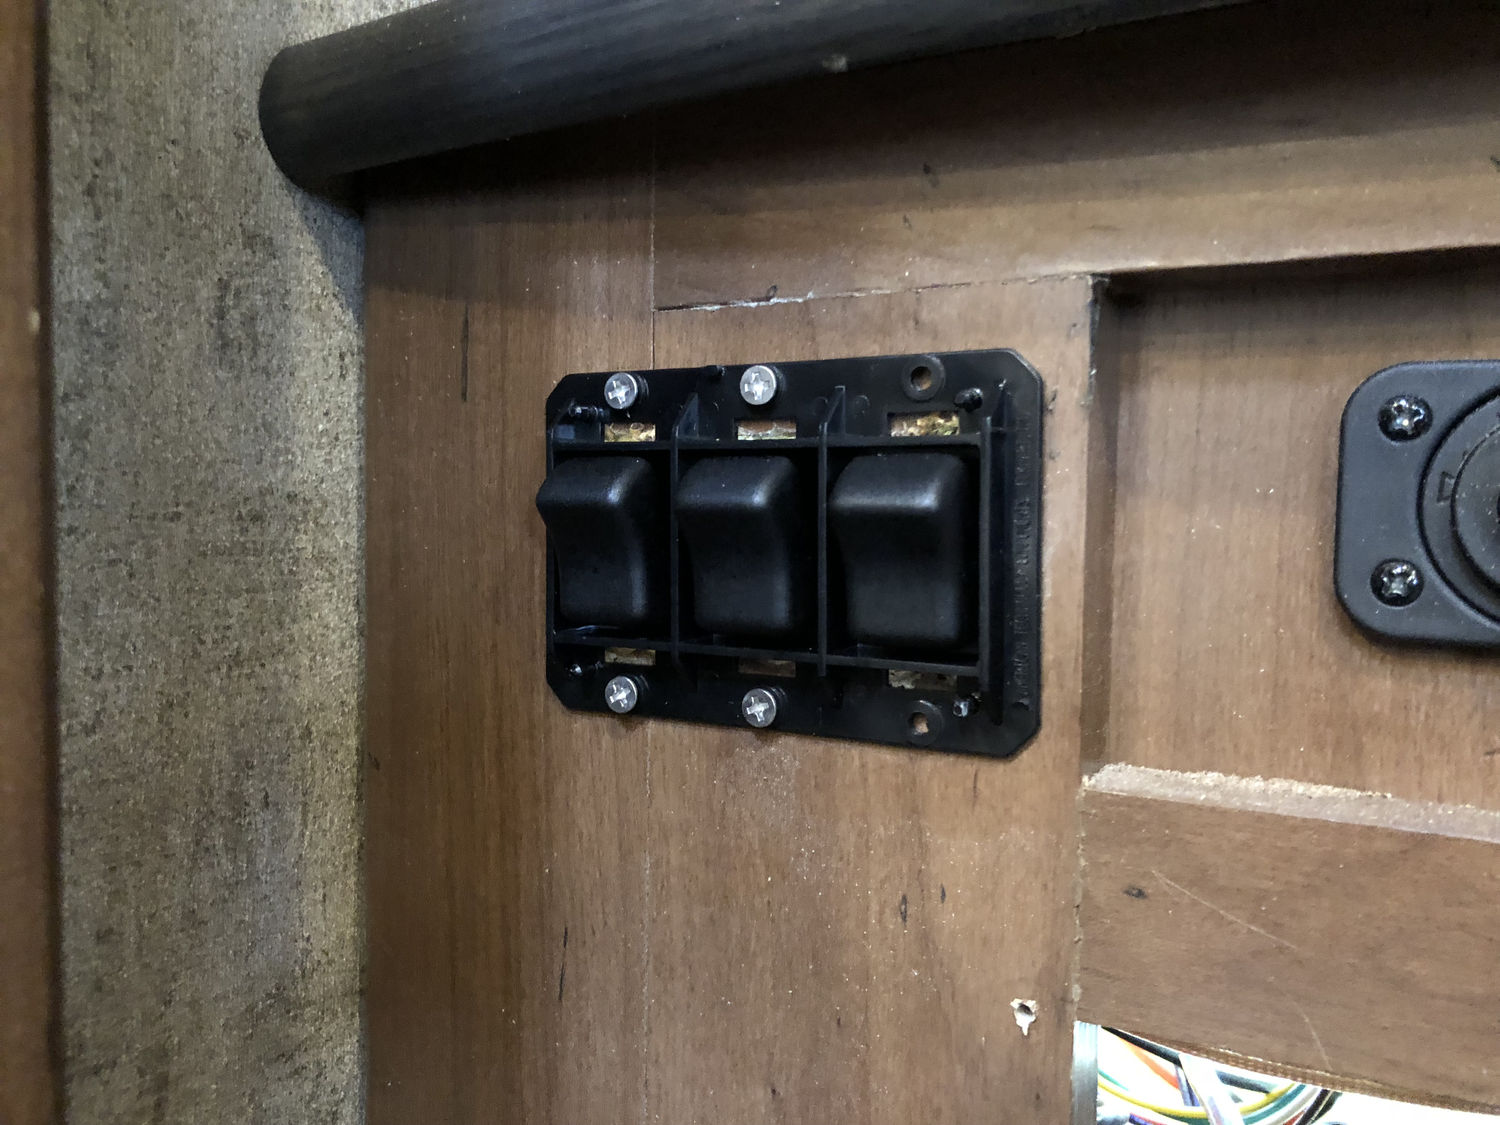 Photo of the 12V switches